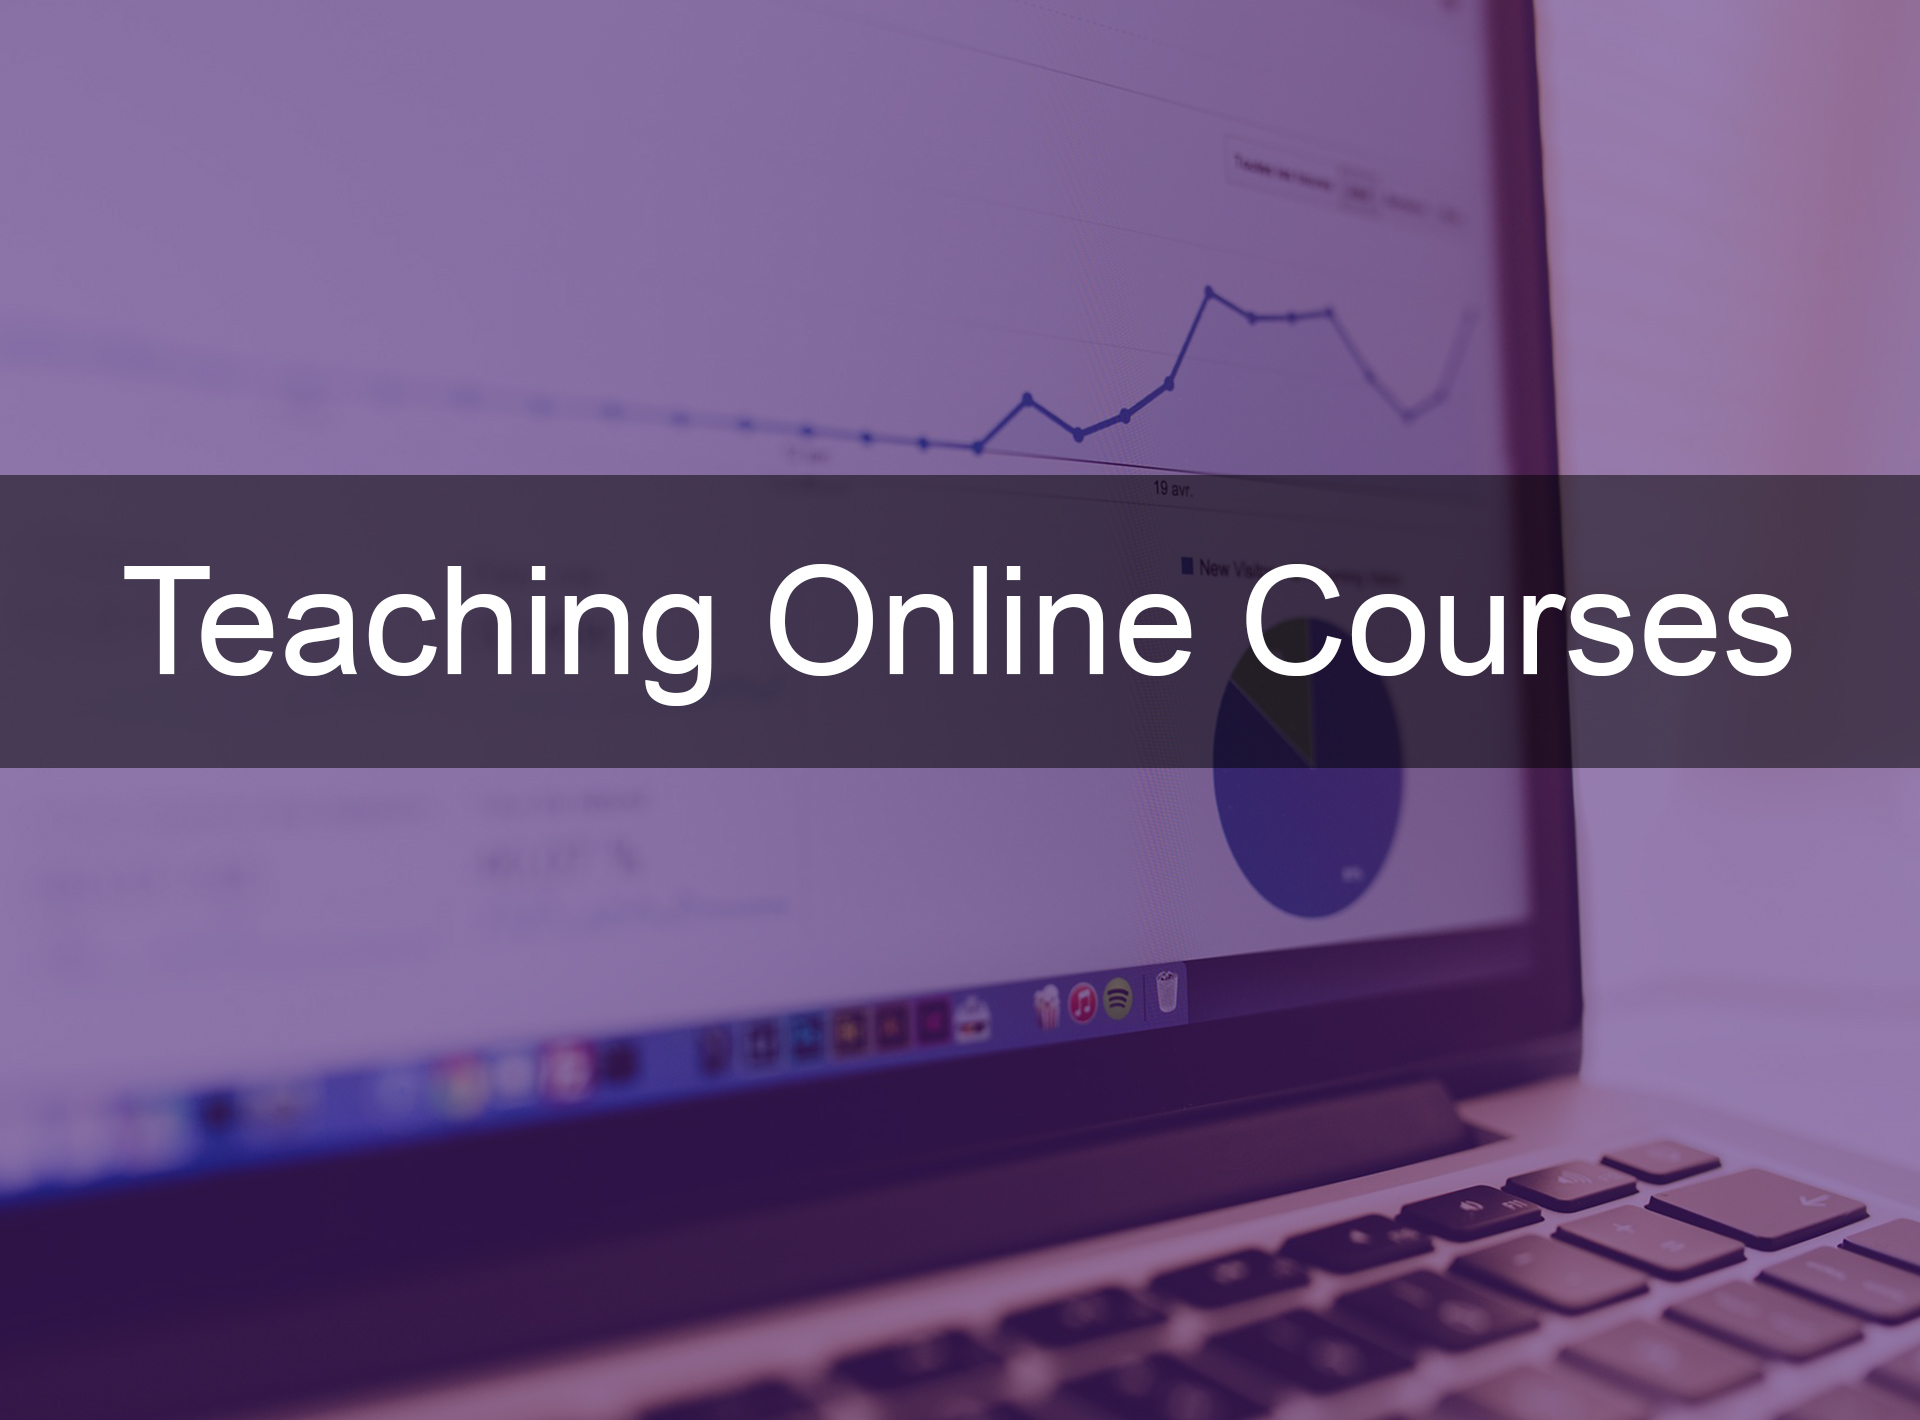 Teaching Online Courses